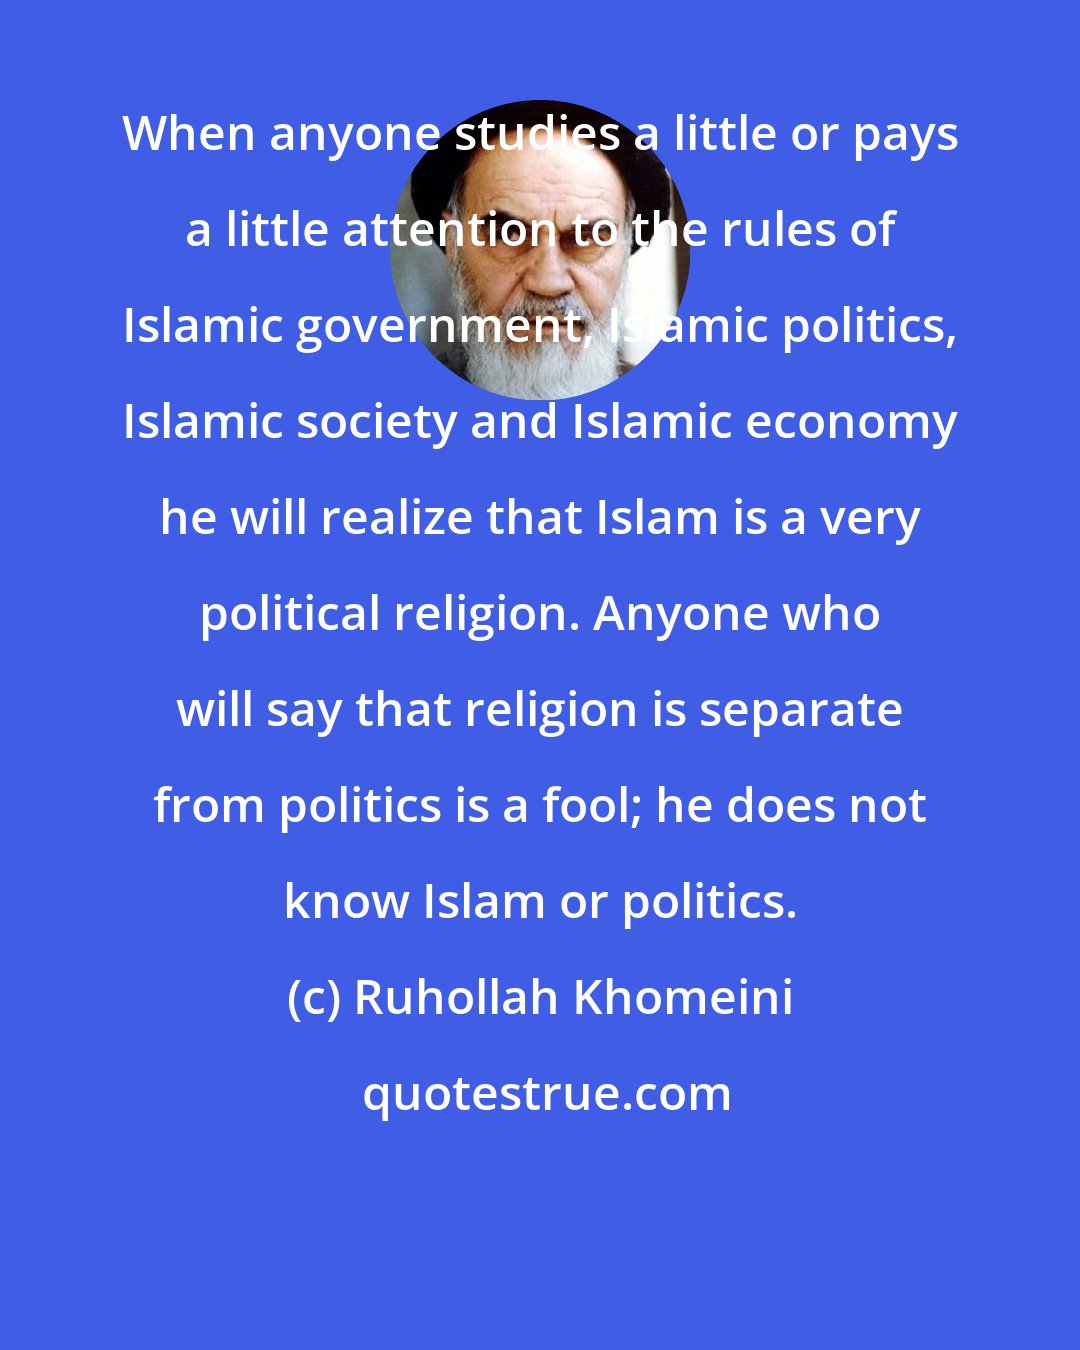 Ruhollah Khomeini: When anyone studies a little or pays a little attention to the rules of Islamic government, Islamic politics, Islamic society and Islamic economy he will realize that Islam is a very political religion. Anyone who will say that religion is separate from politics is a fool; he does not know Islam or politics.